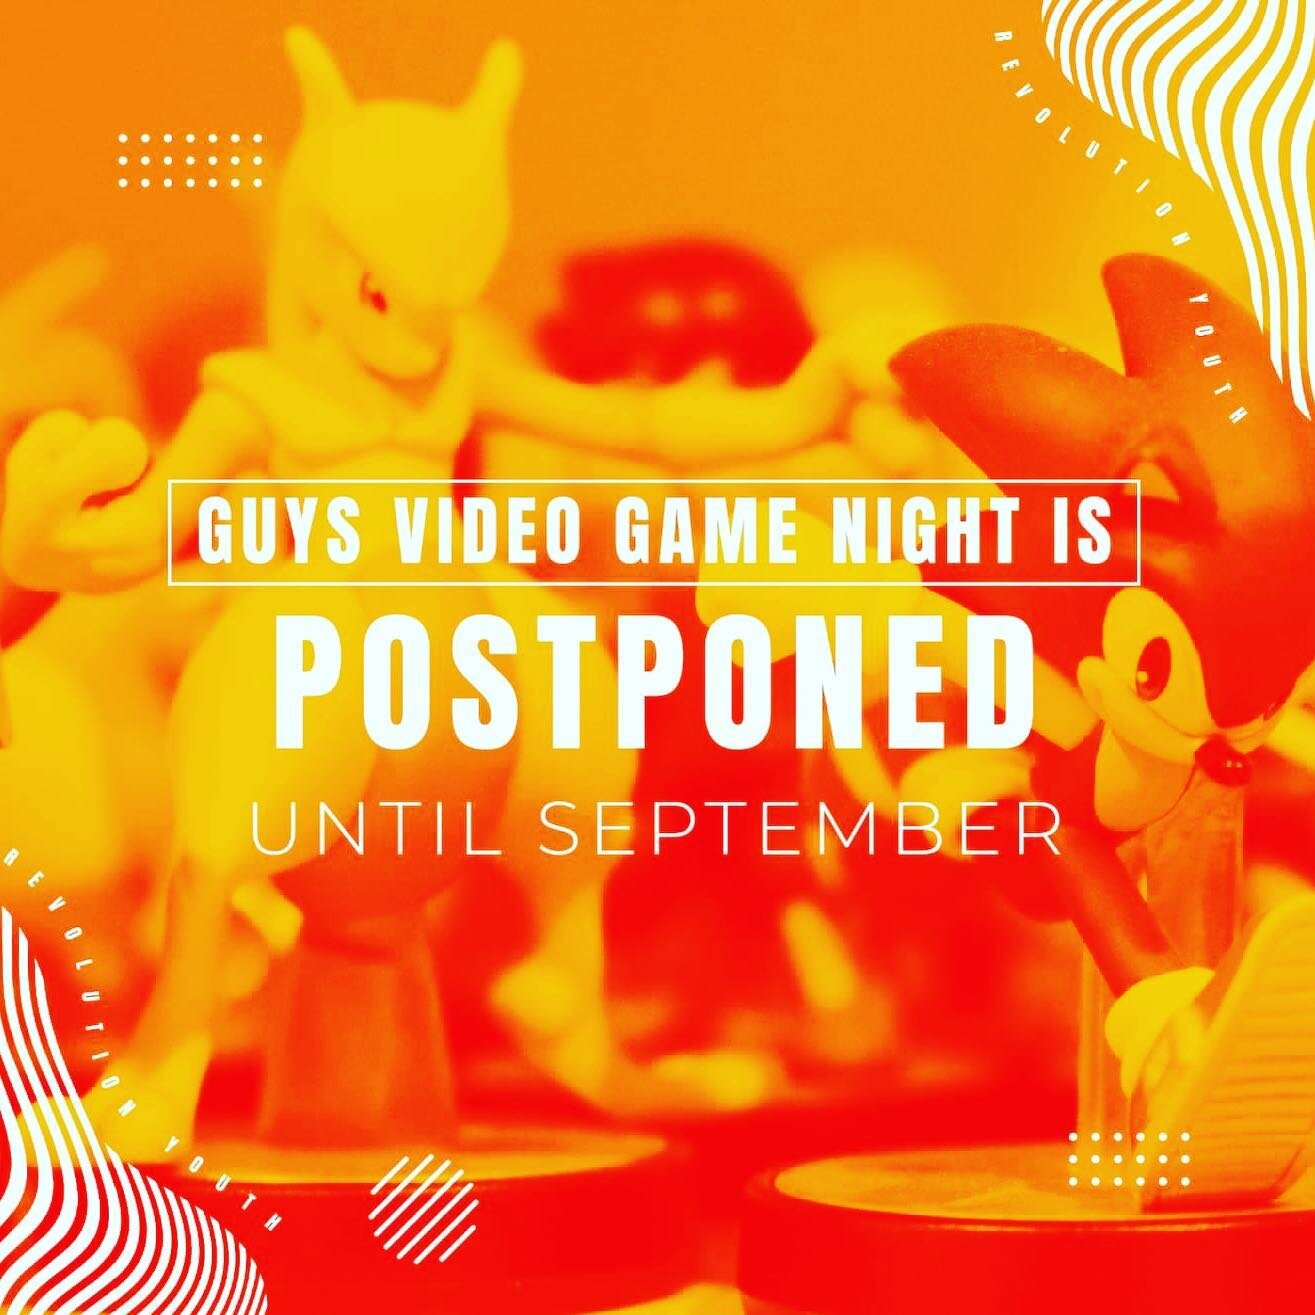 Hey Revolution Youth! Somehow, during the absolutely weirdest time of NOTHING and yet busyness, we've ended up with a schedule conflict! As you know, we had to postpone the Guys Video Game Night last weekend due to illness, and now we've got other ex